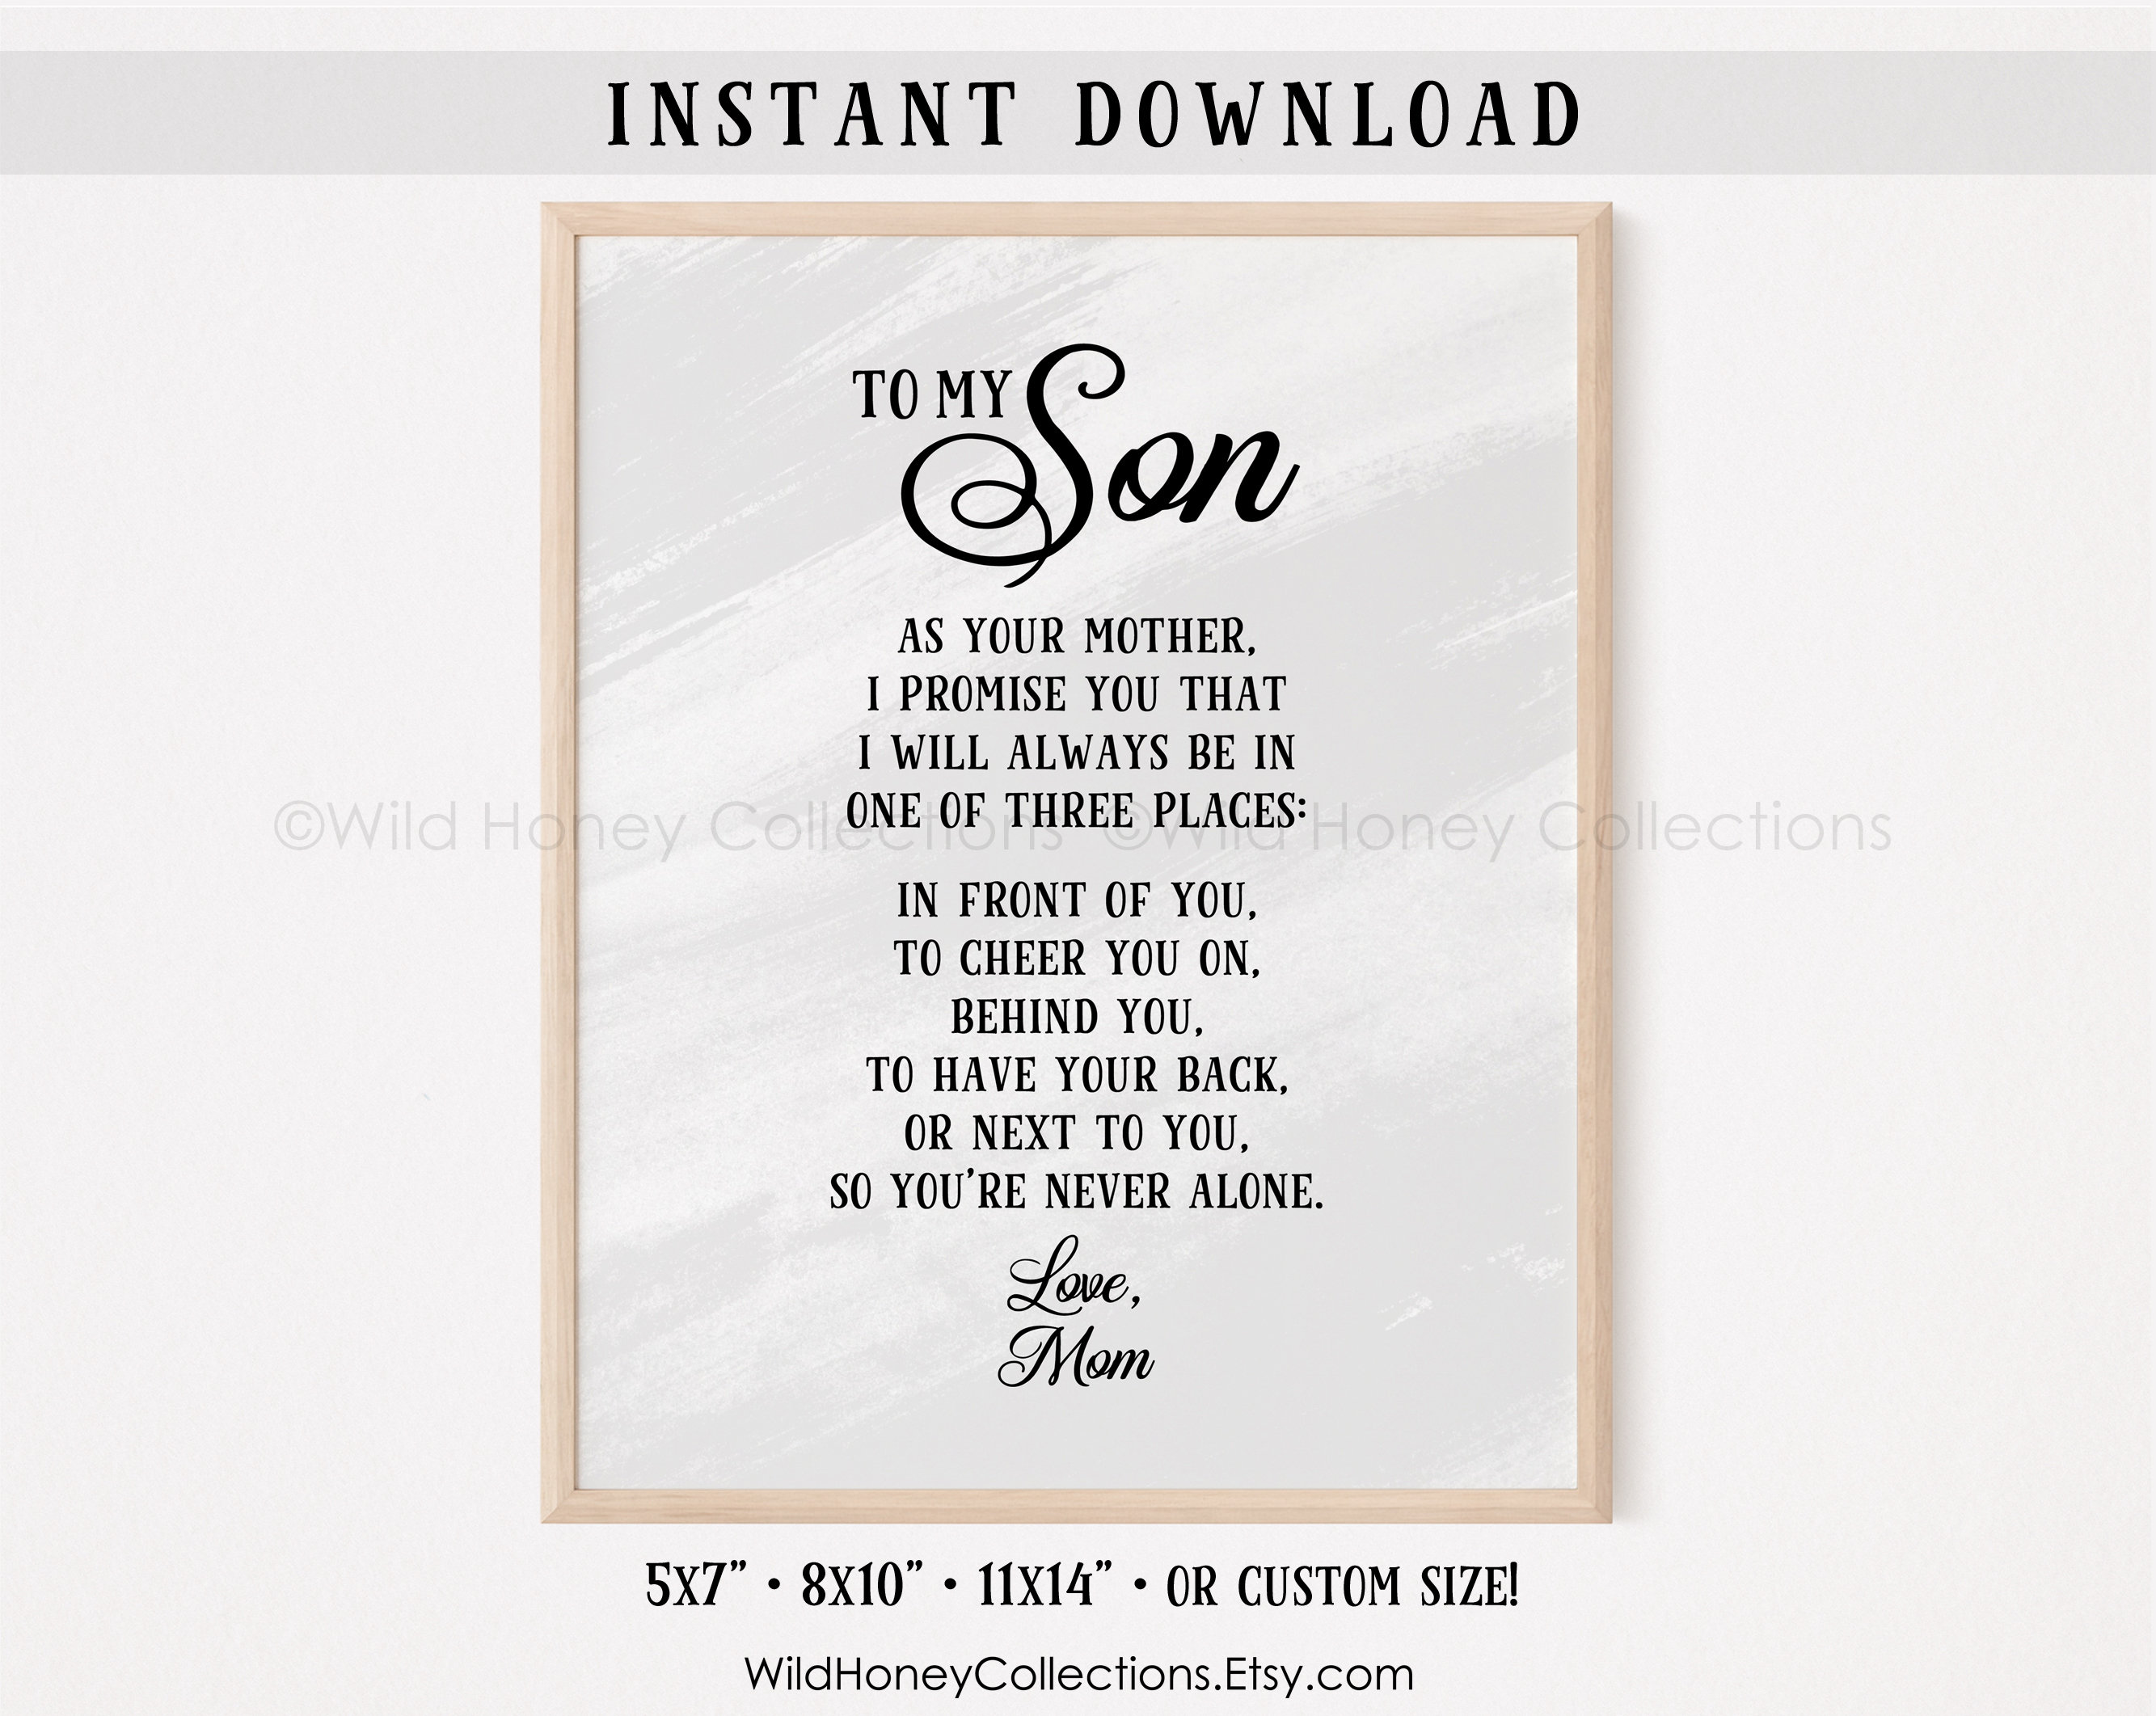 To My Son Printable Poem Mother to Son Gift Printable Wall picture picture